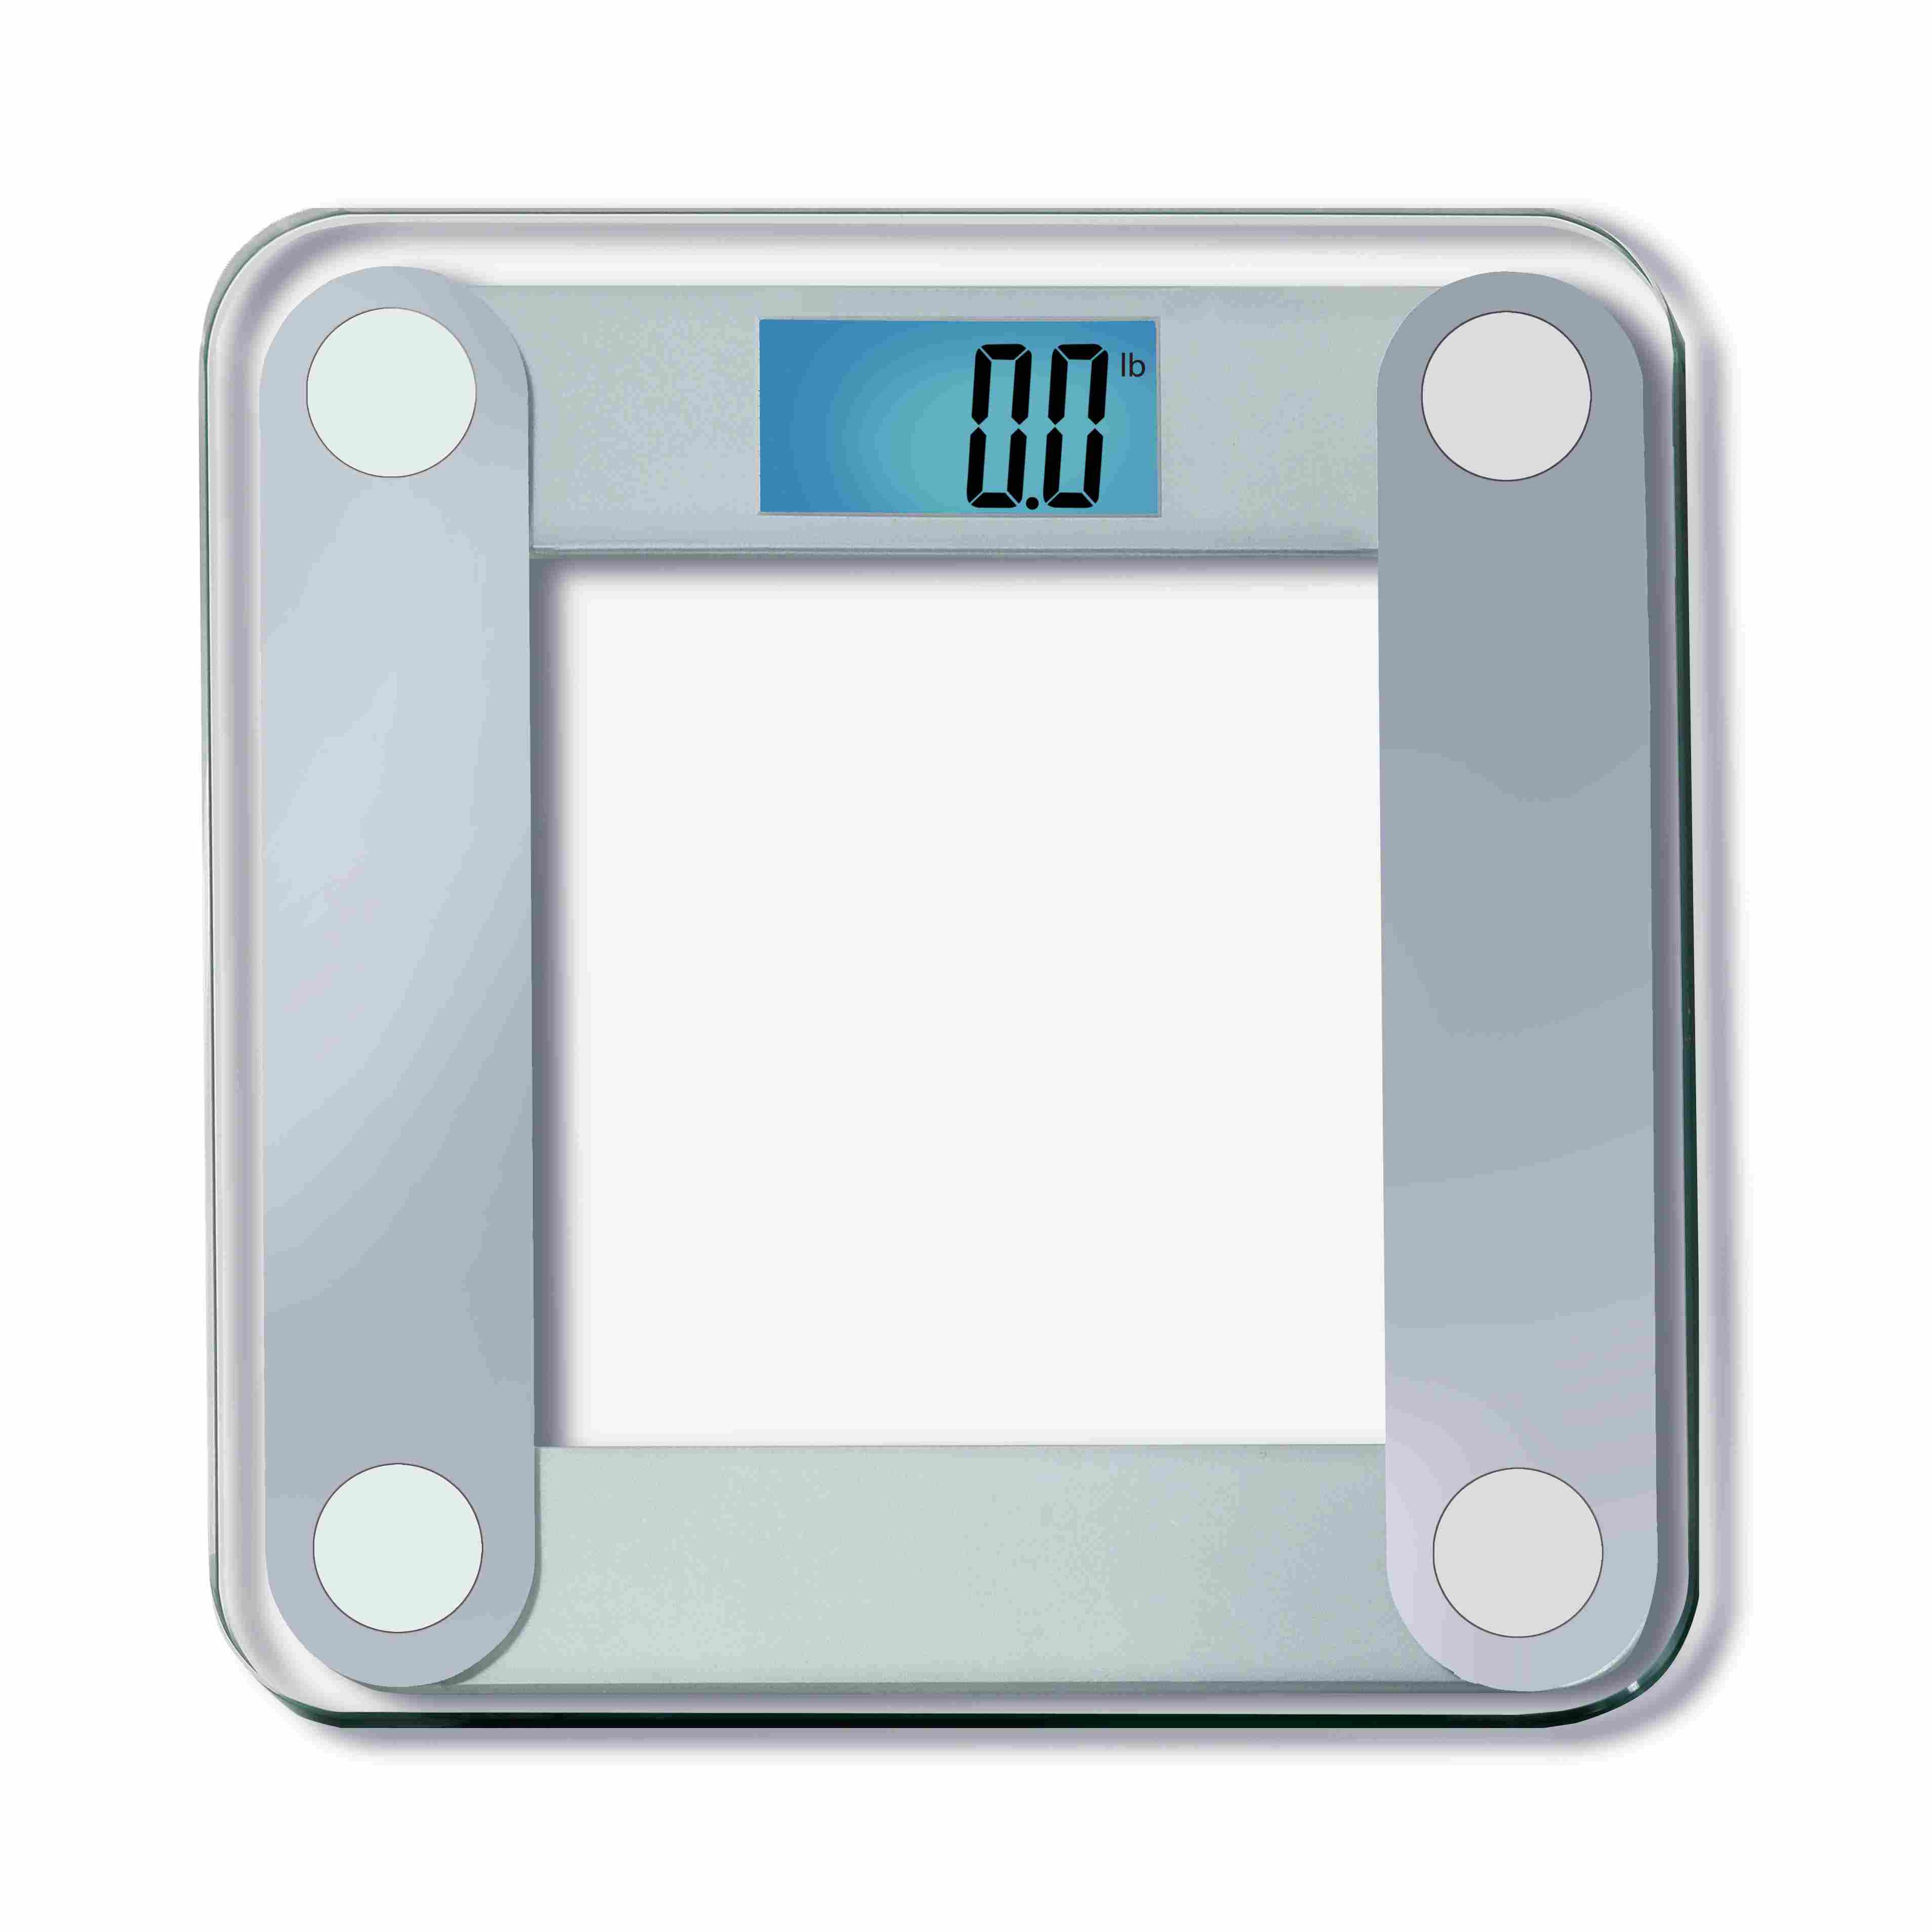 The 7 Best Bathroom Scales To Buy In 2018